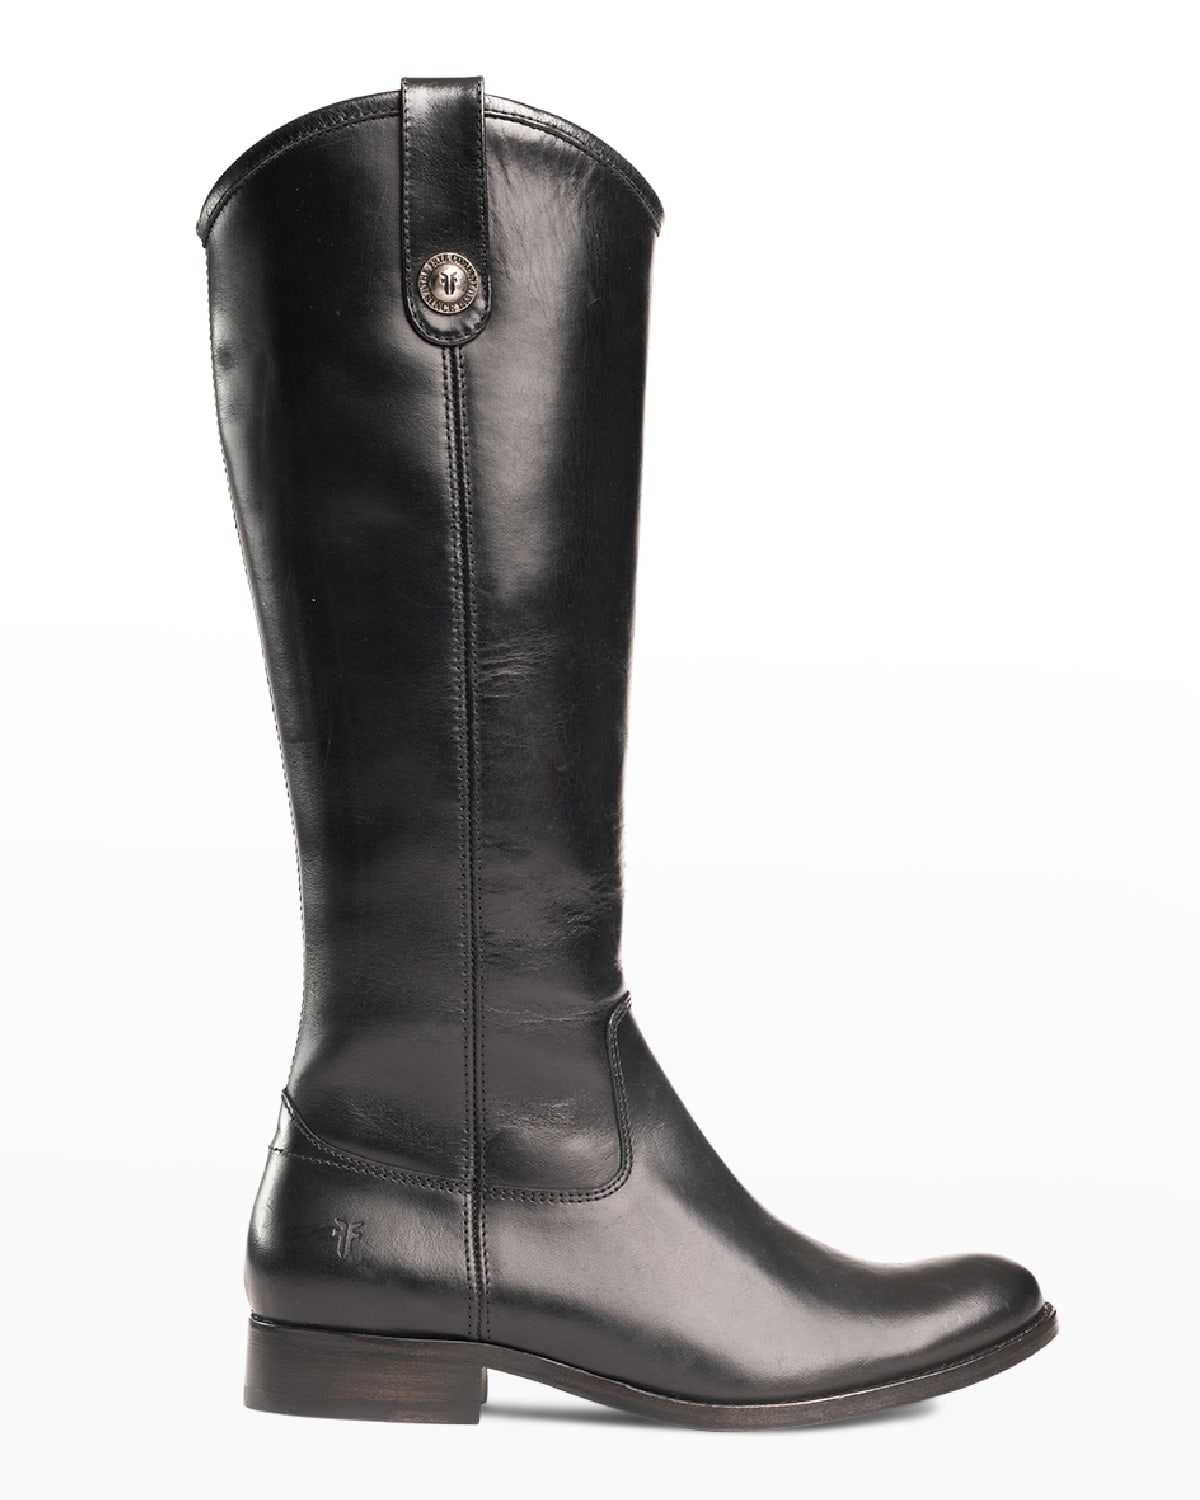 FRYE MELISSA BUTTON LEATHER TALL RIDING BOOTS